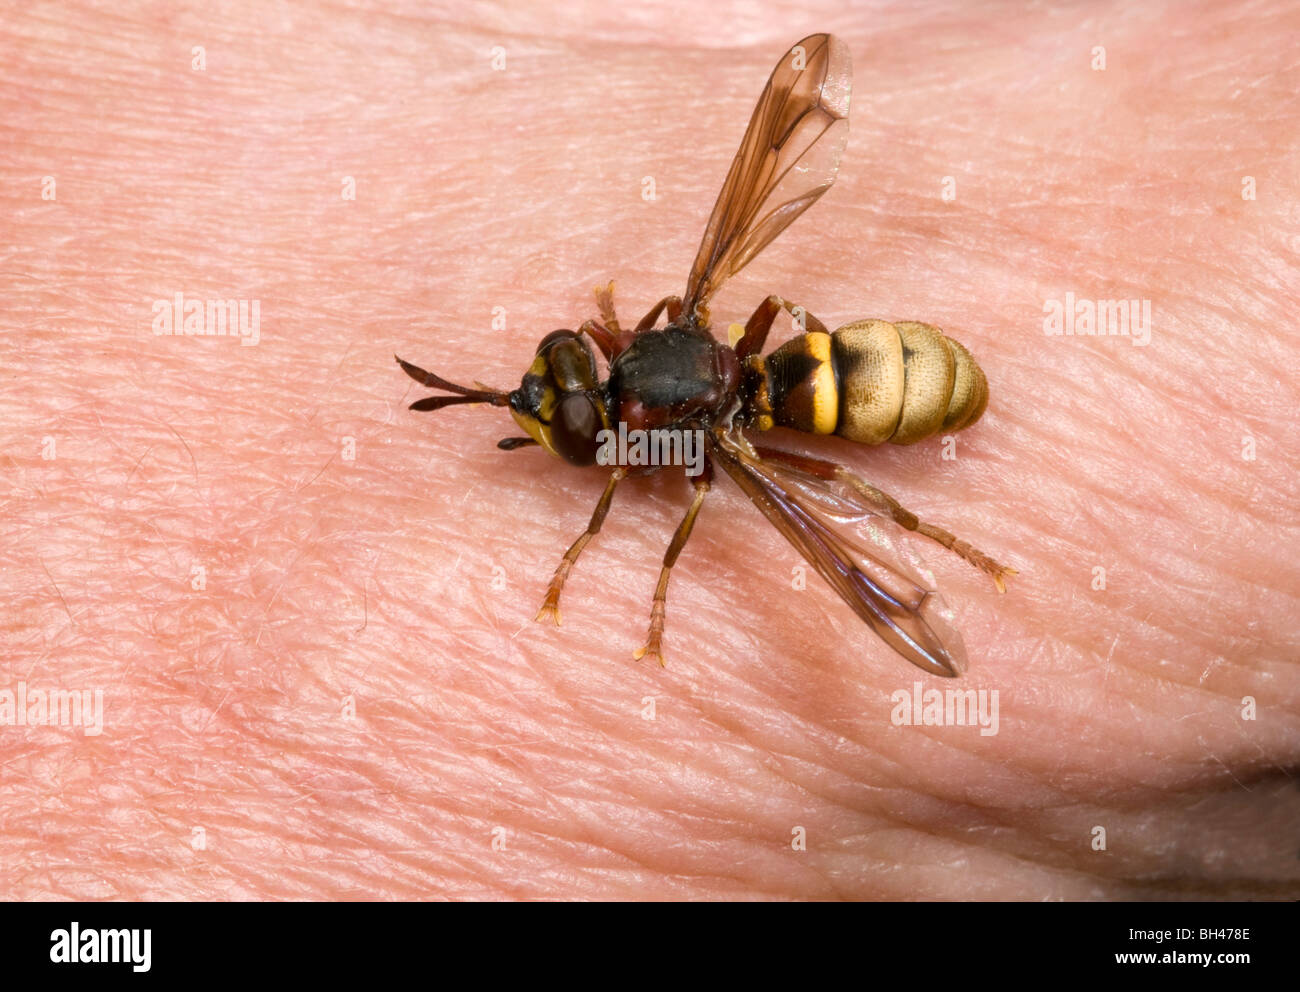 Spider-hunting wasp (Cryptocheilus spectabile). Resting on human skin. Stock Photo